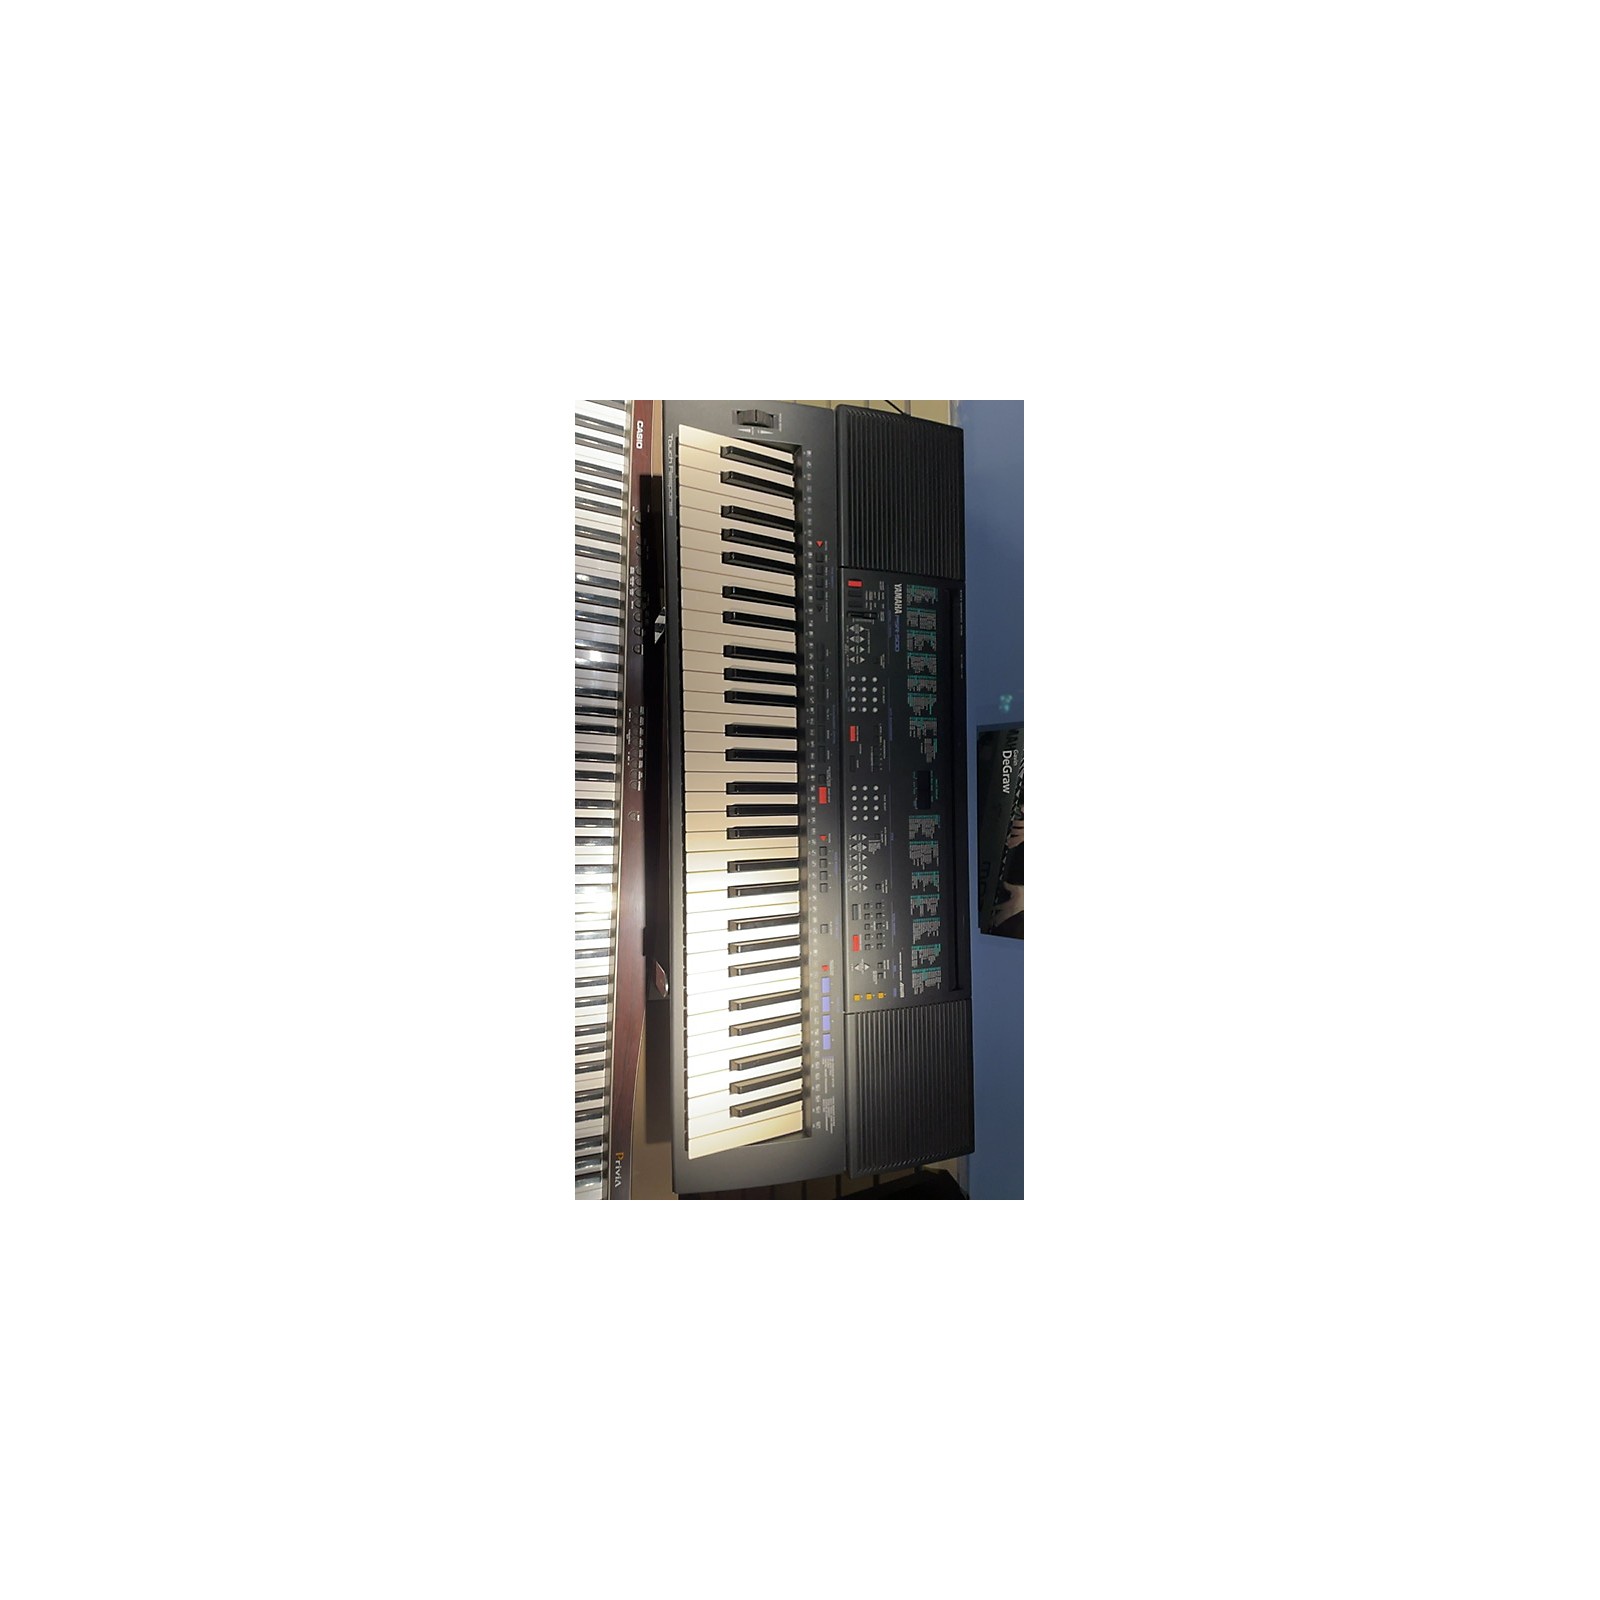 Achat SYNTHETISEUR YAMAHA PSR-500 PIED HOUSSE occasion - Ahuy